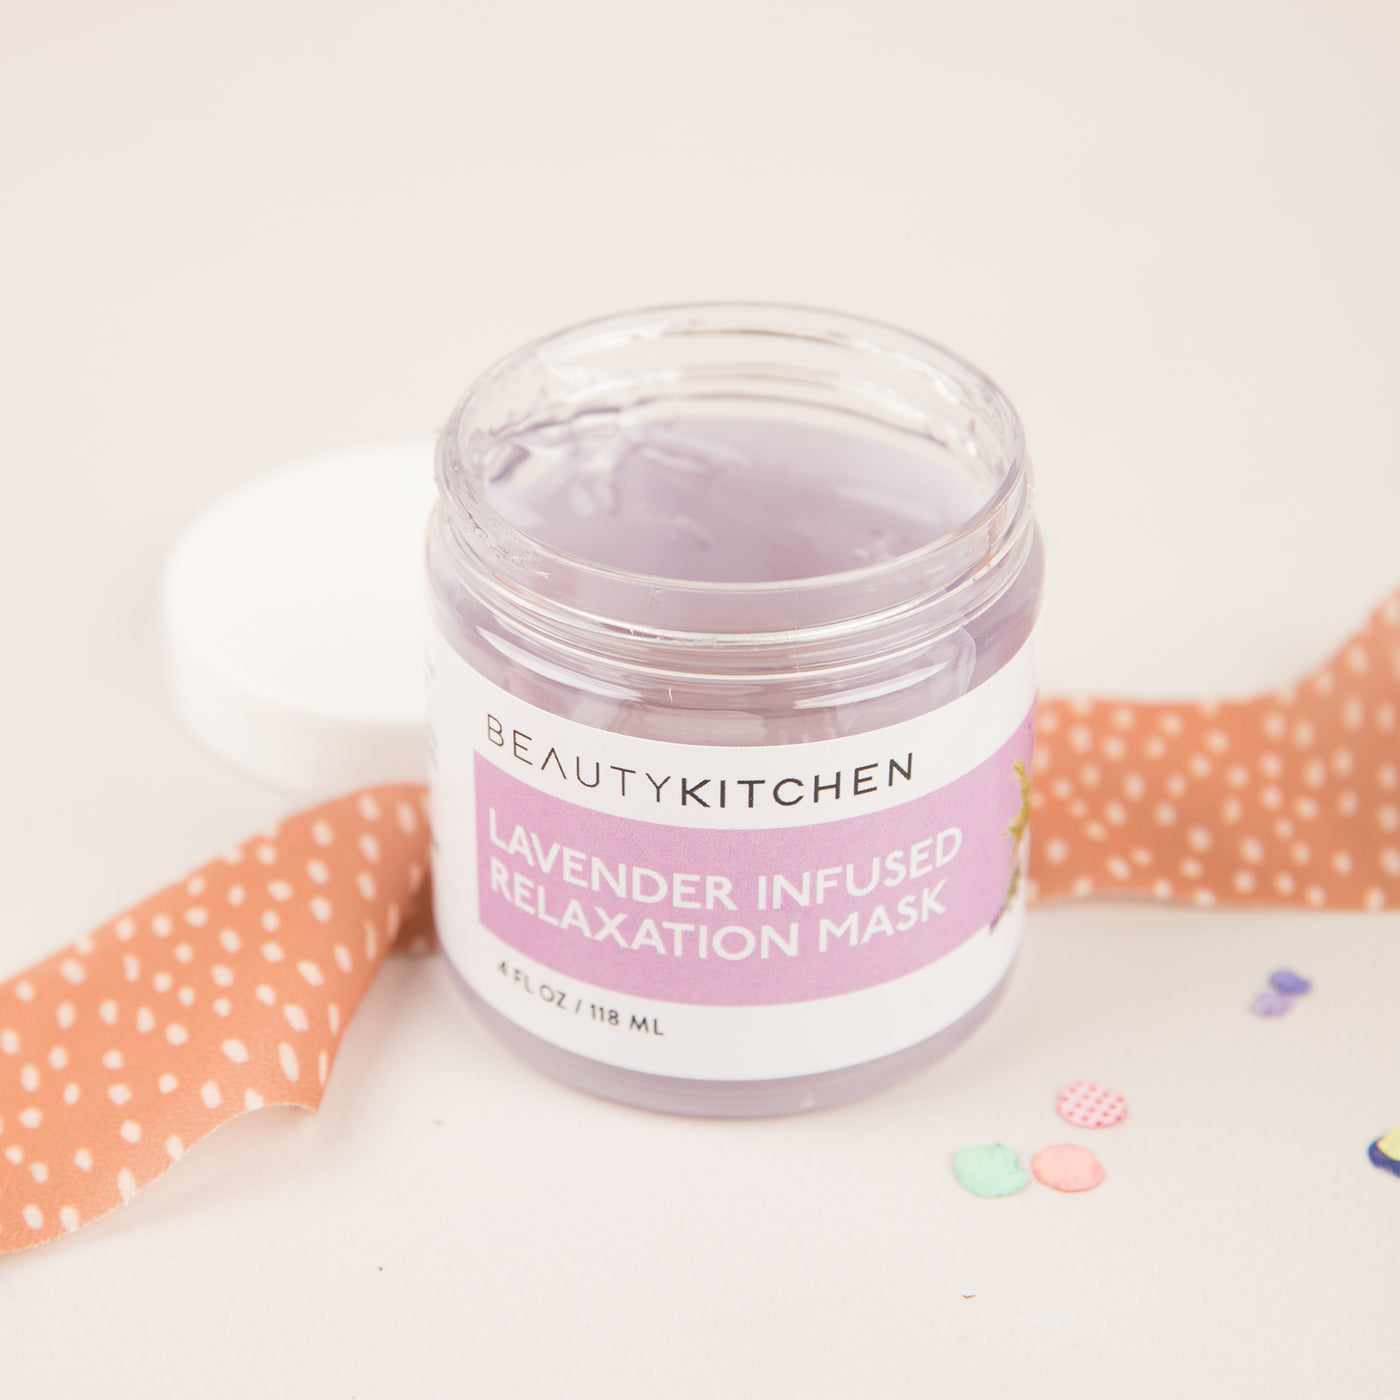 Lavender infused relaxation mask.